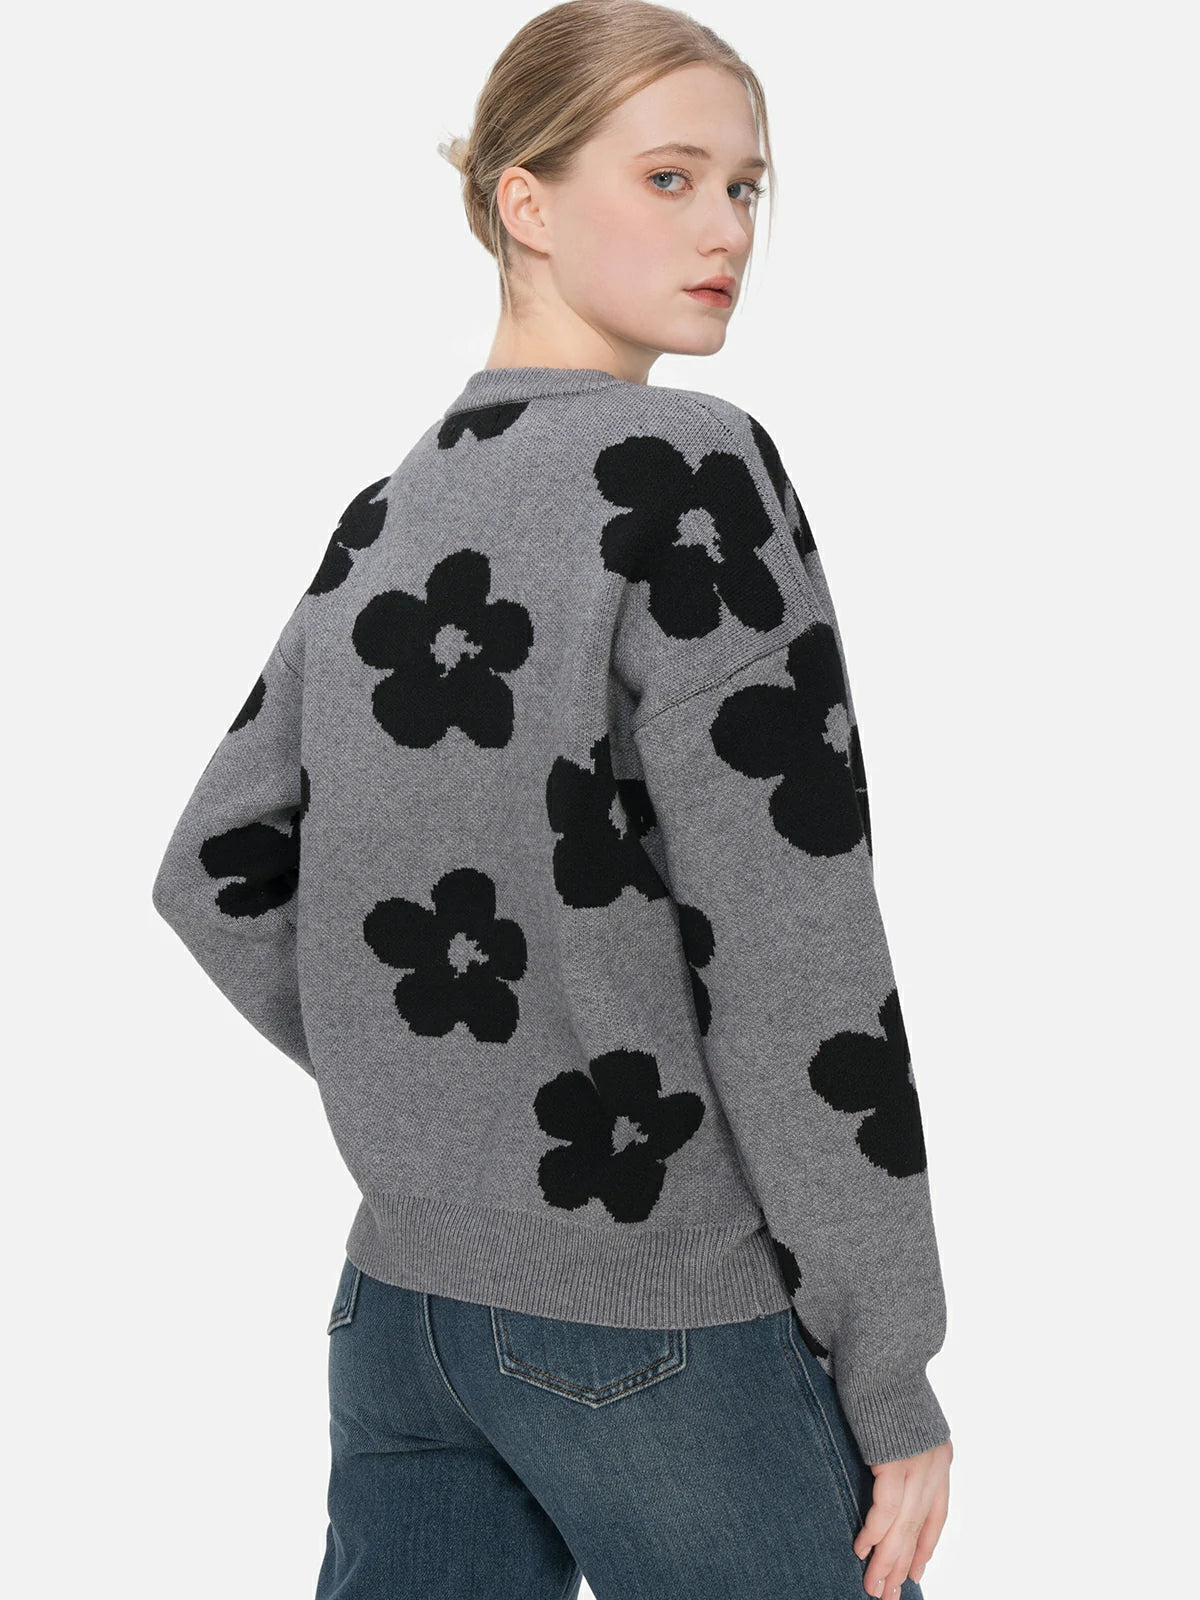 Embrace natural grace with a gray floral-print sweater in a loose and comfortable fit